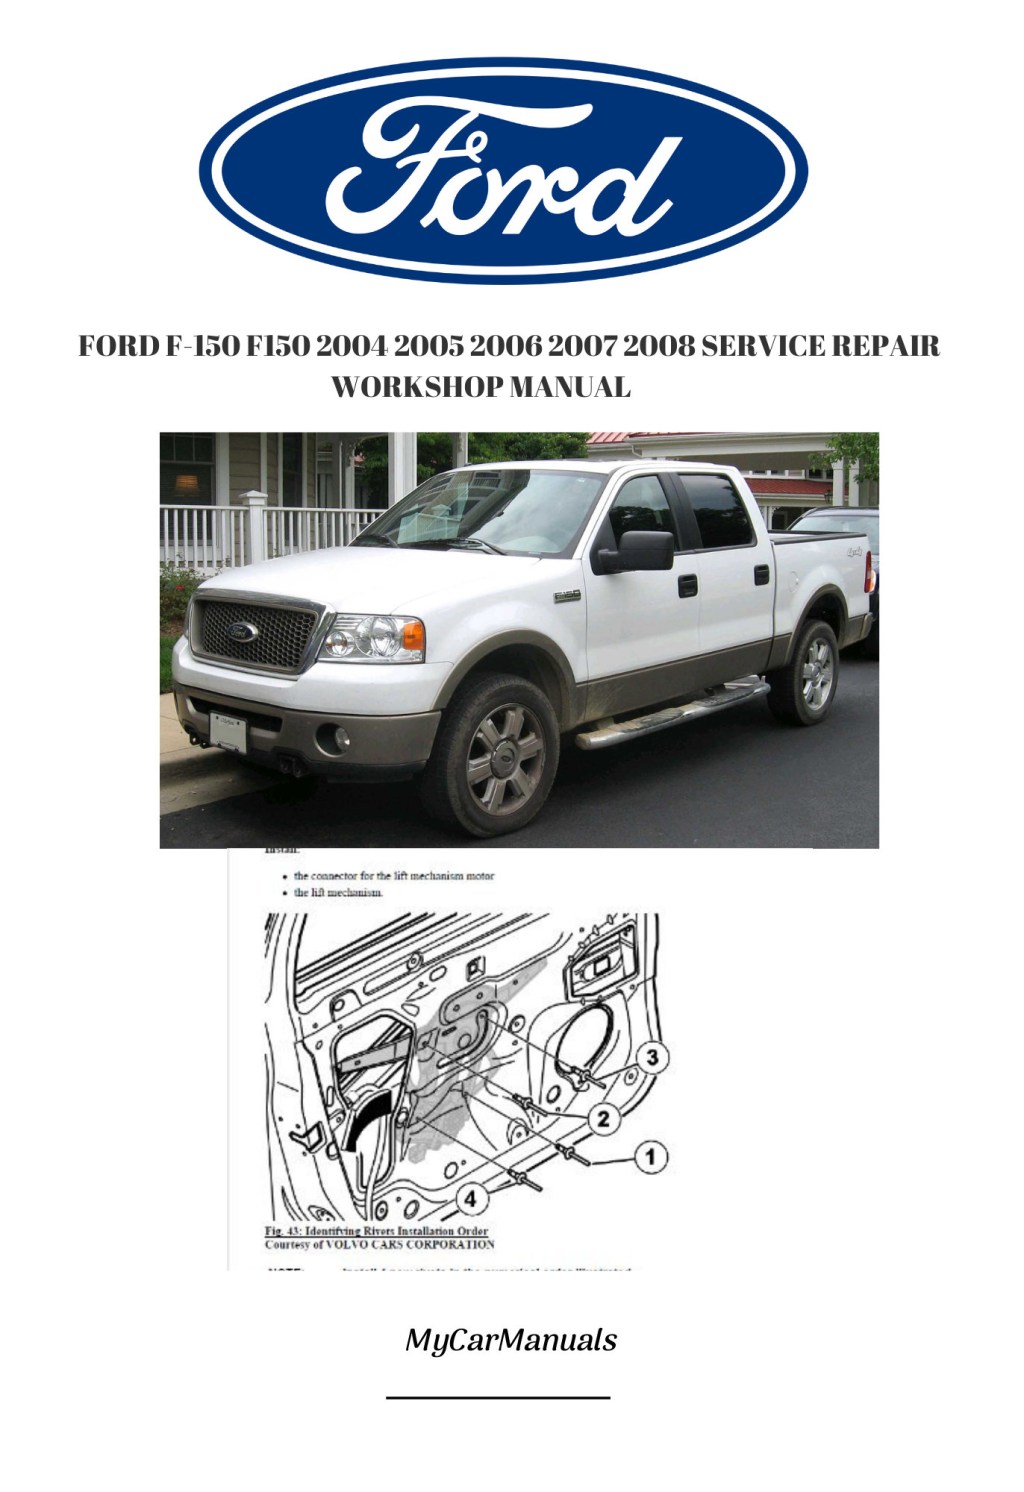 Picture of: FORD F- F      SERVICE REPAIR Workshop Manual